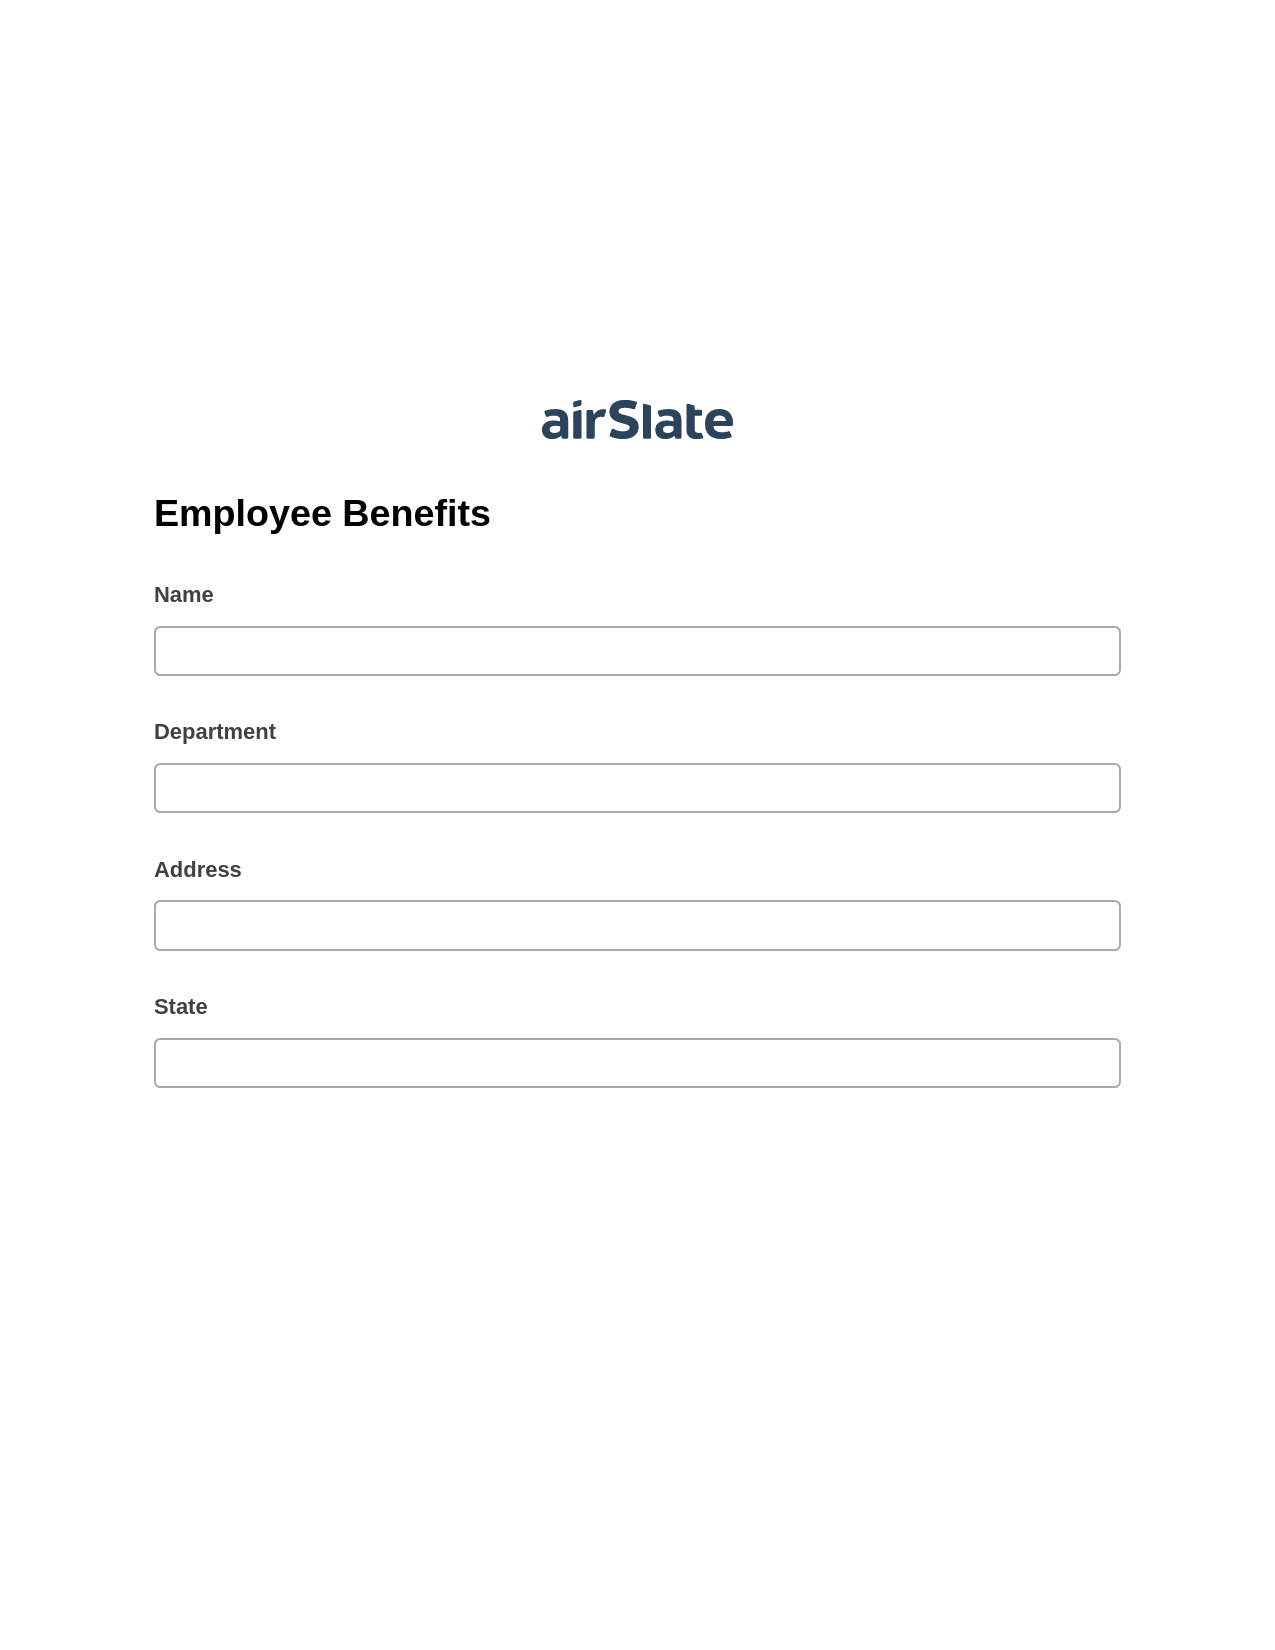 Multirole Employee Benefits Pre-fill Slate from MS Dynamics 365 Records Bot, Unassign Role Bot, Post-finish Document Bot